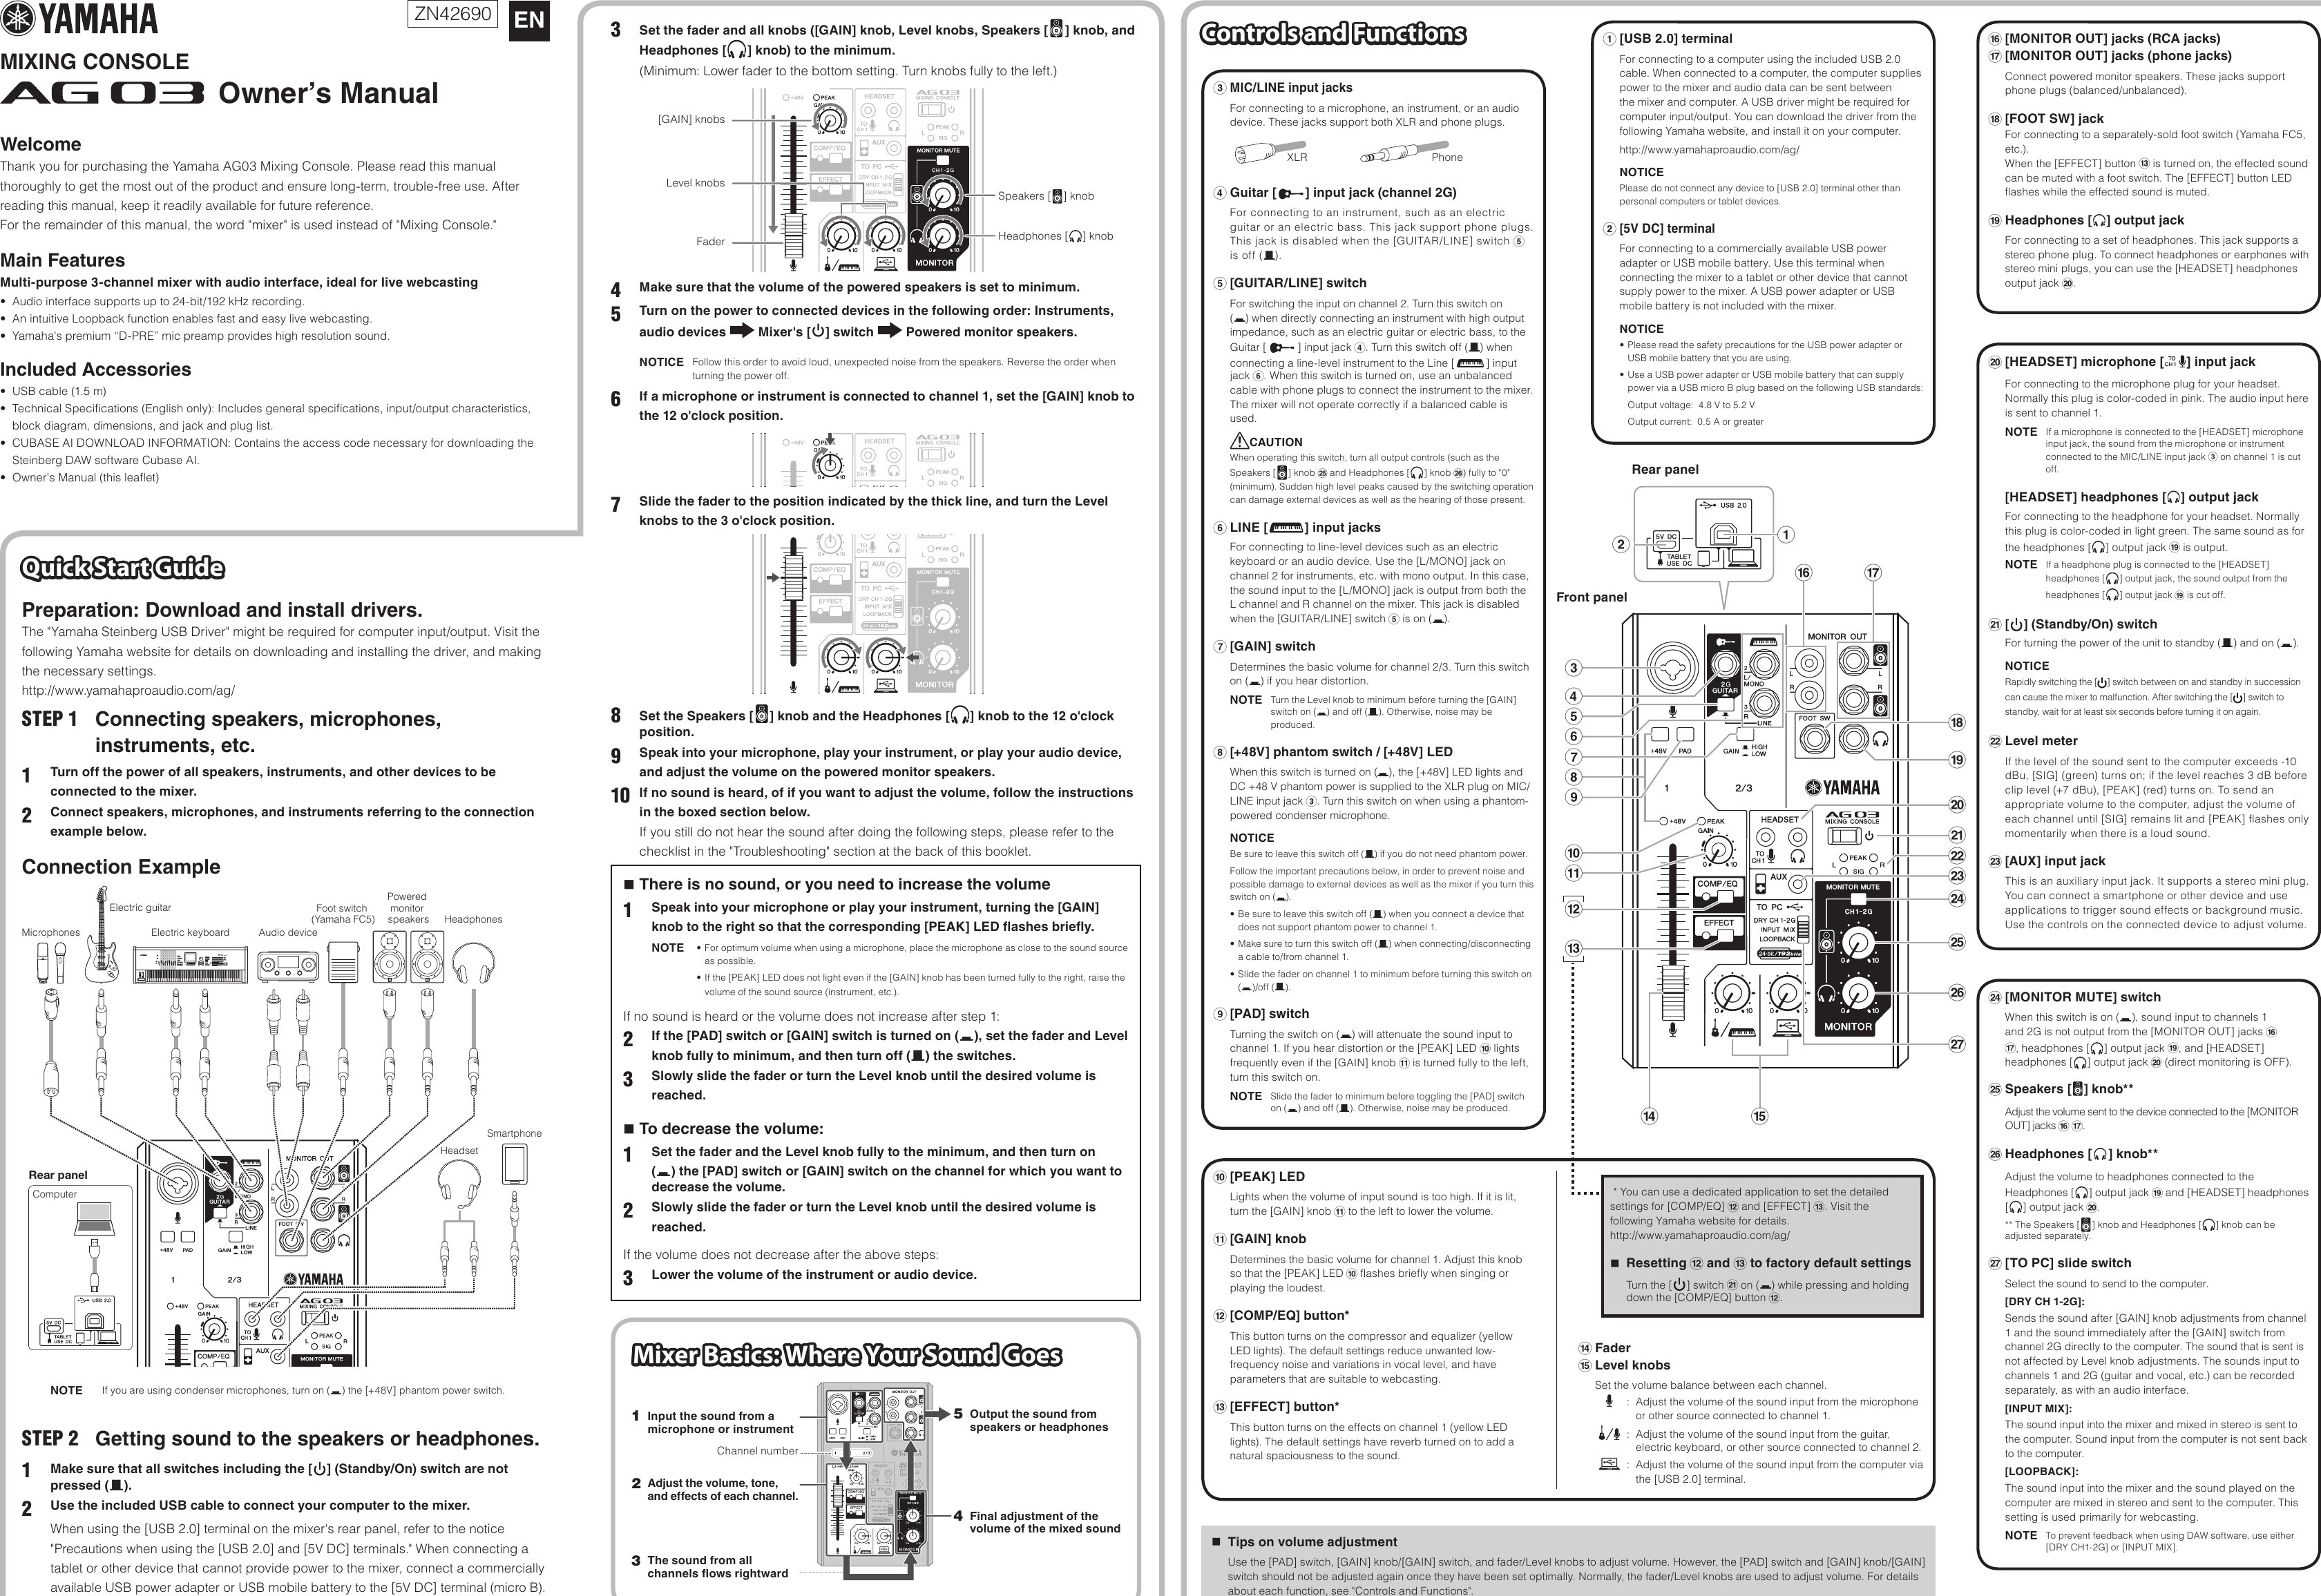 Page 1 of 2 - Yamaha Ag03-Owners-Manual AG03 Owner's Manual  Yamaha-ag03-owners-manual